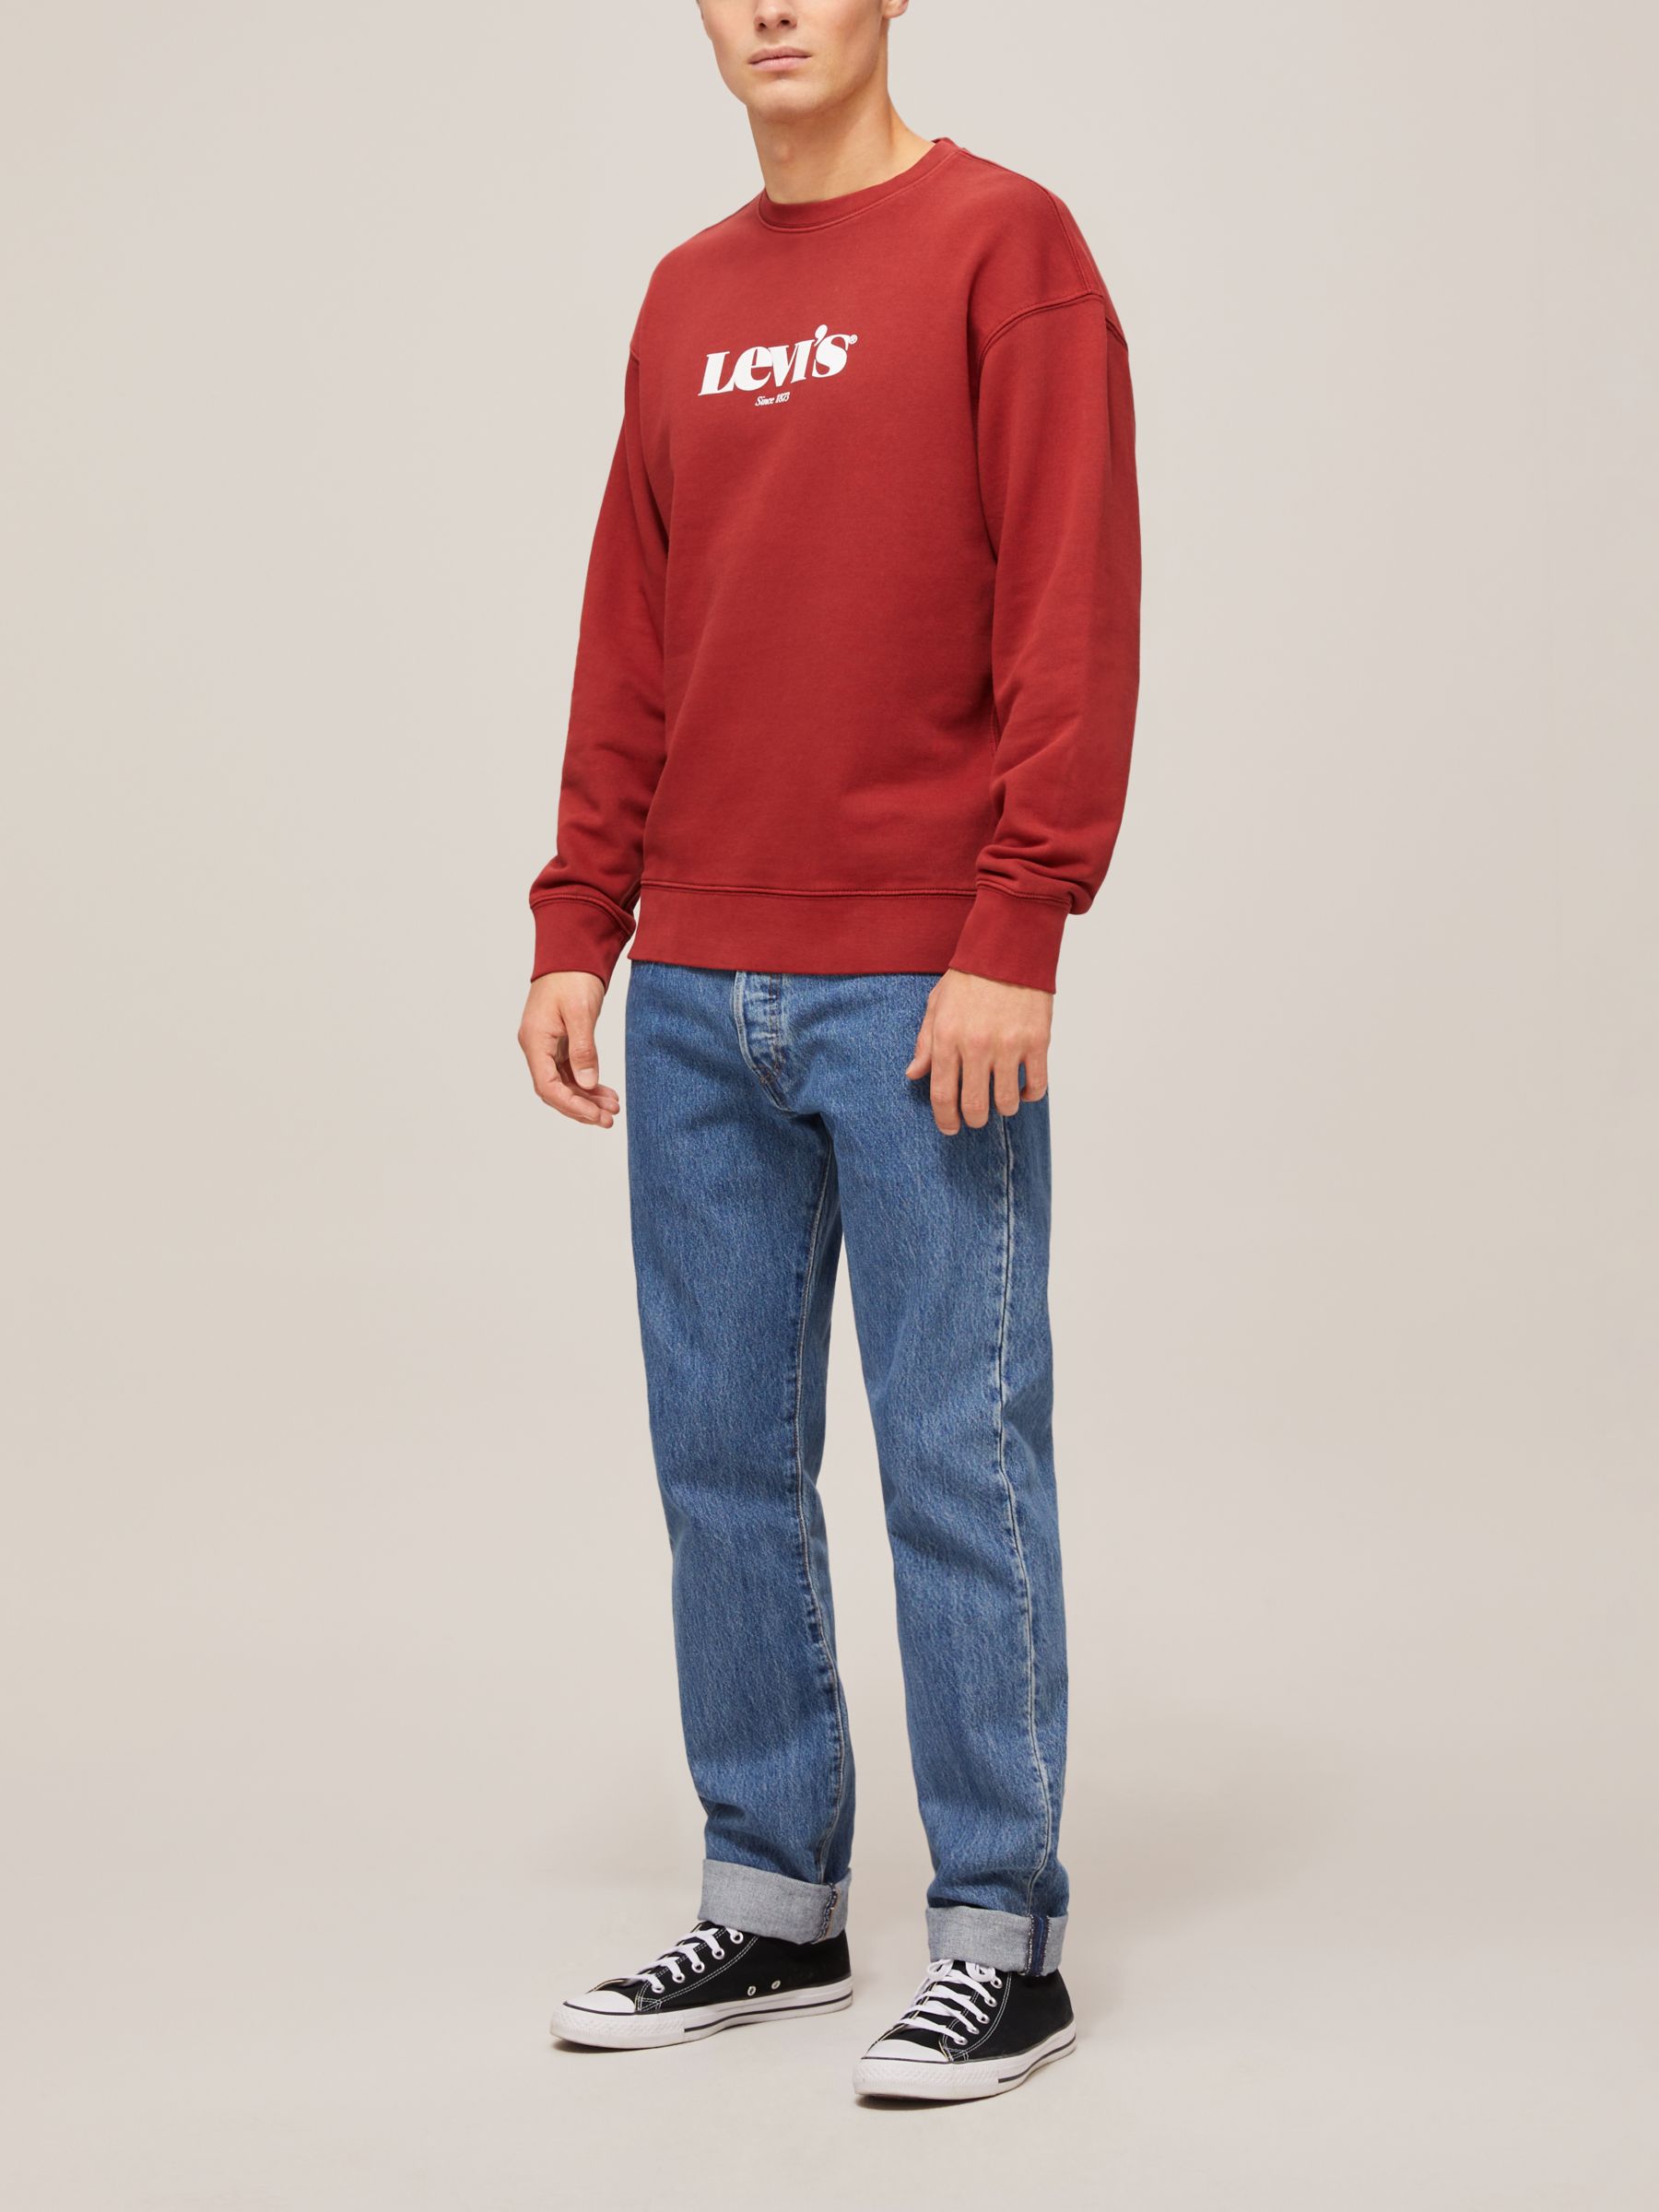 Levi's Relaxed Graphic Crew Neck Sweatshirt, Brown